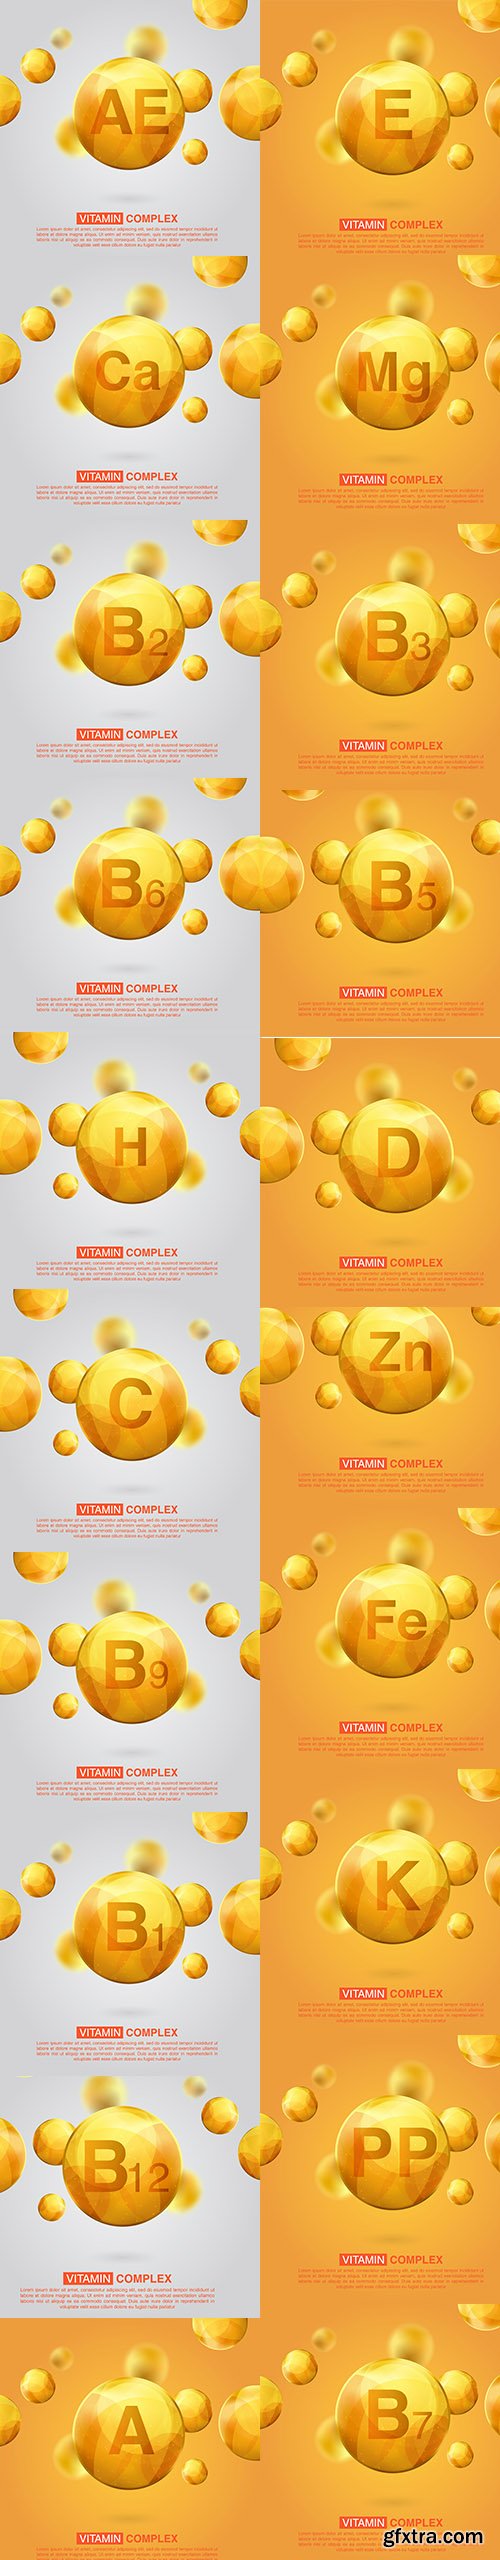 Collection of Gold Vitamin Pill Capsule Illustration